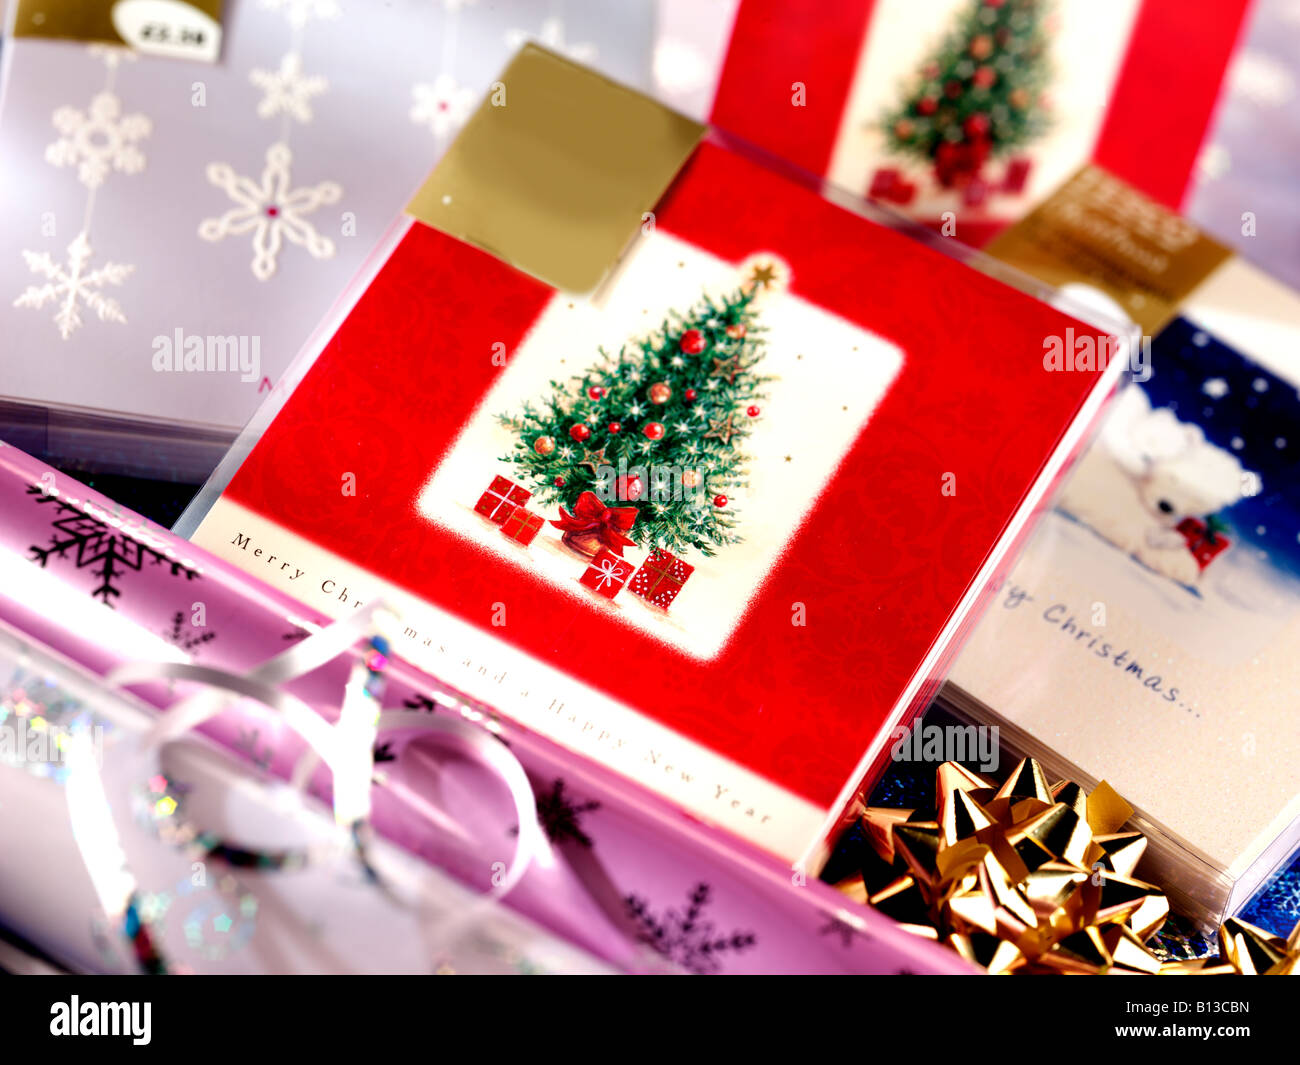 CHRISTMAS GIFTWRAP AND CARDS Stock Photo